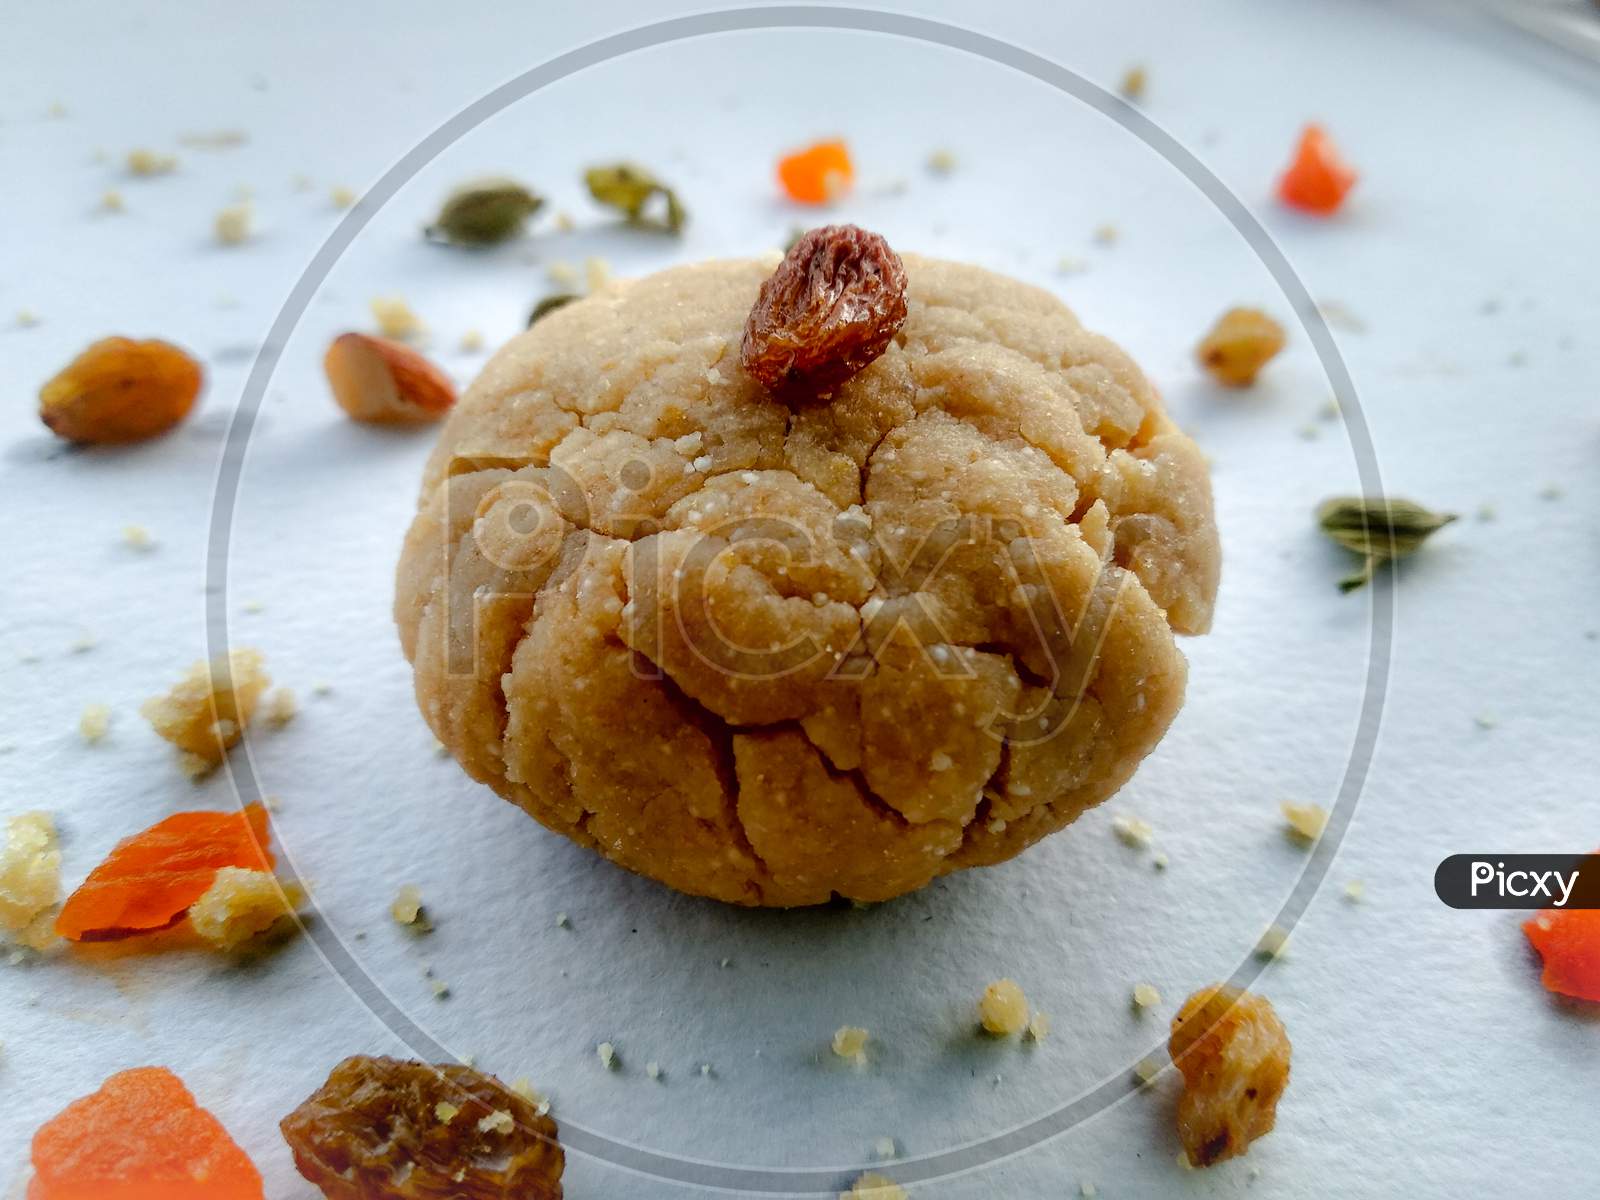 Wheat Baked Cookies sprinkled with some dry fruits